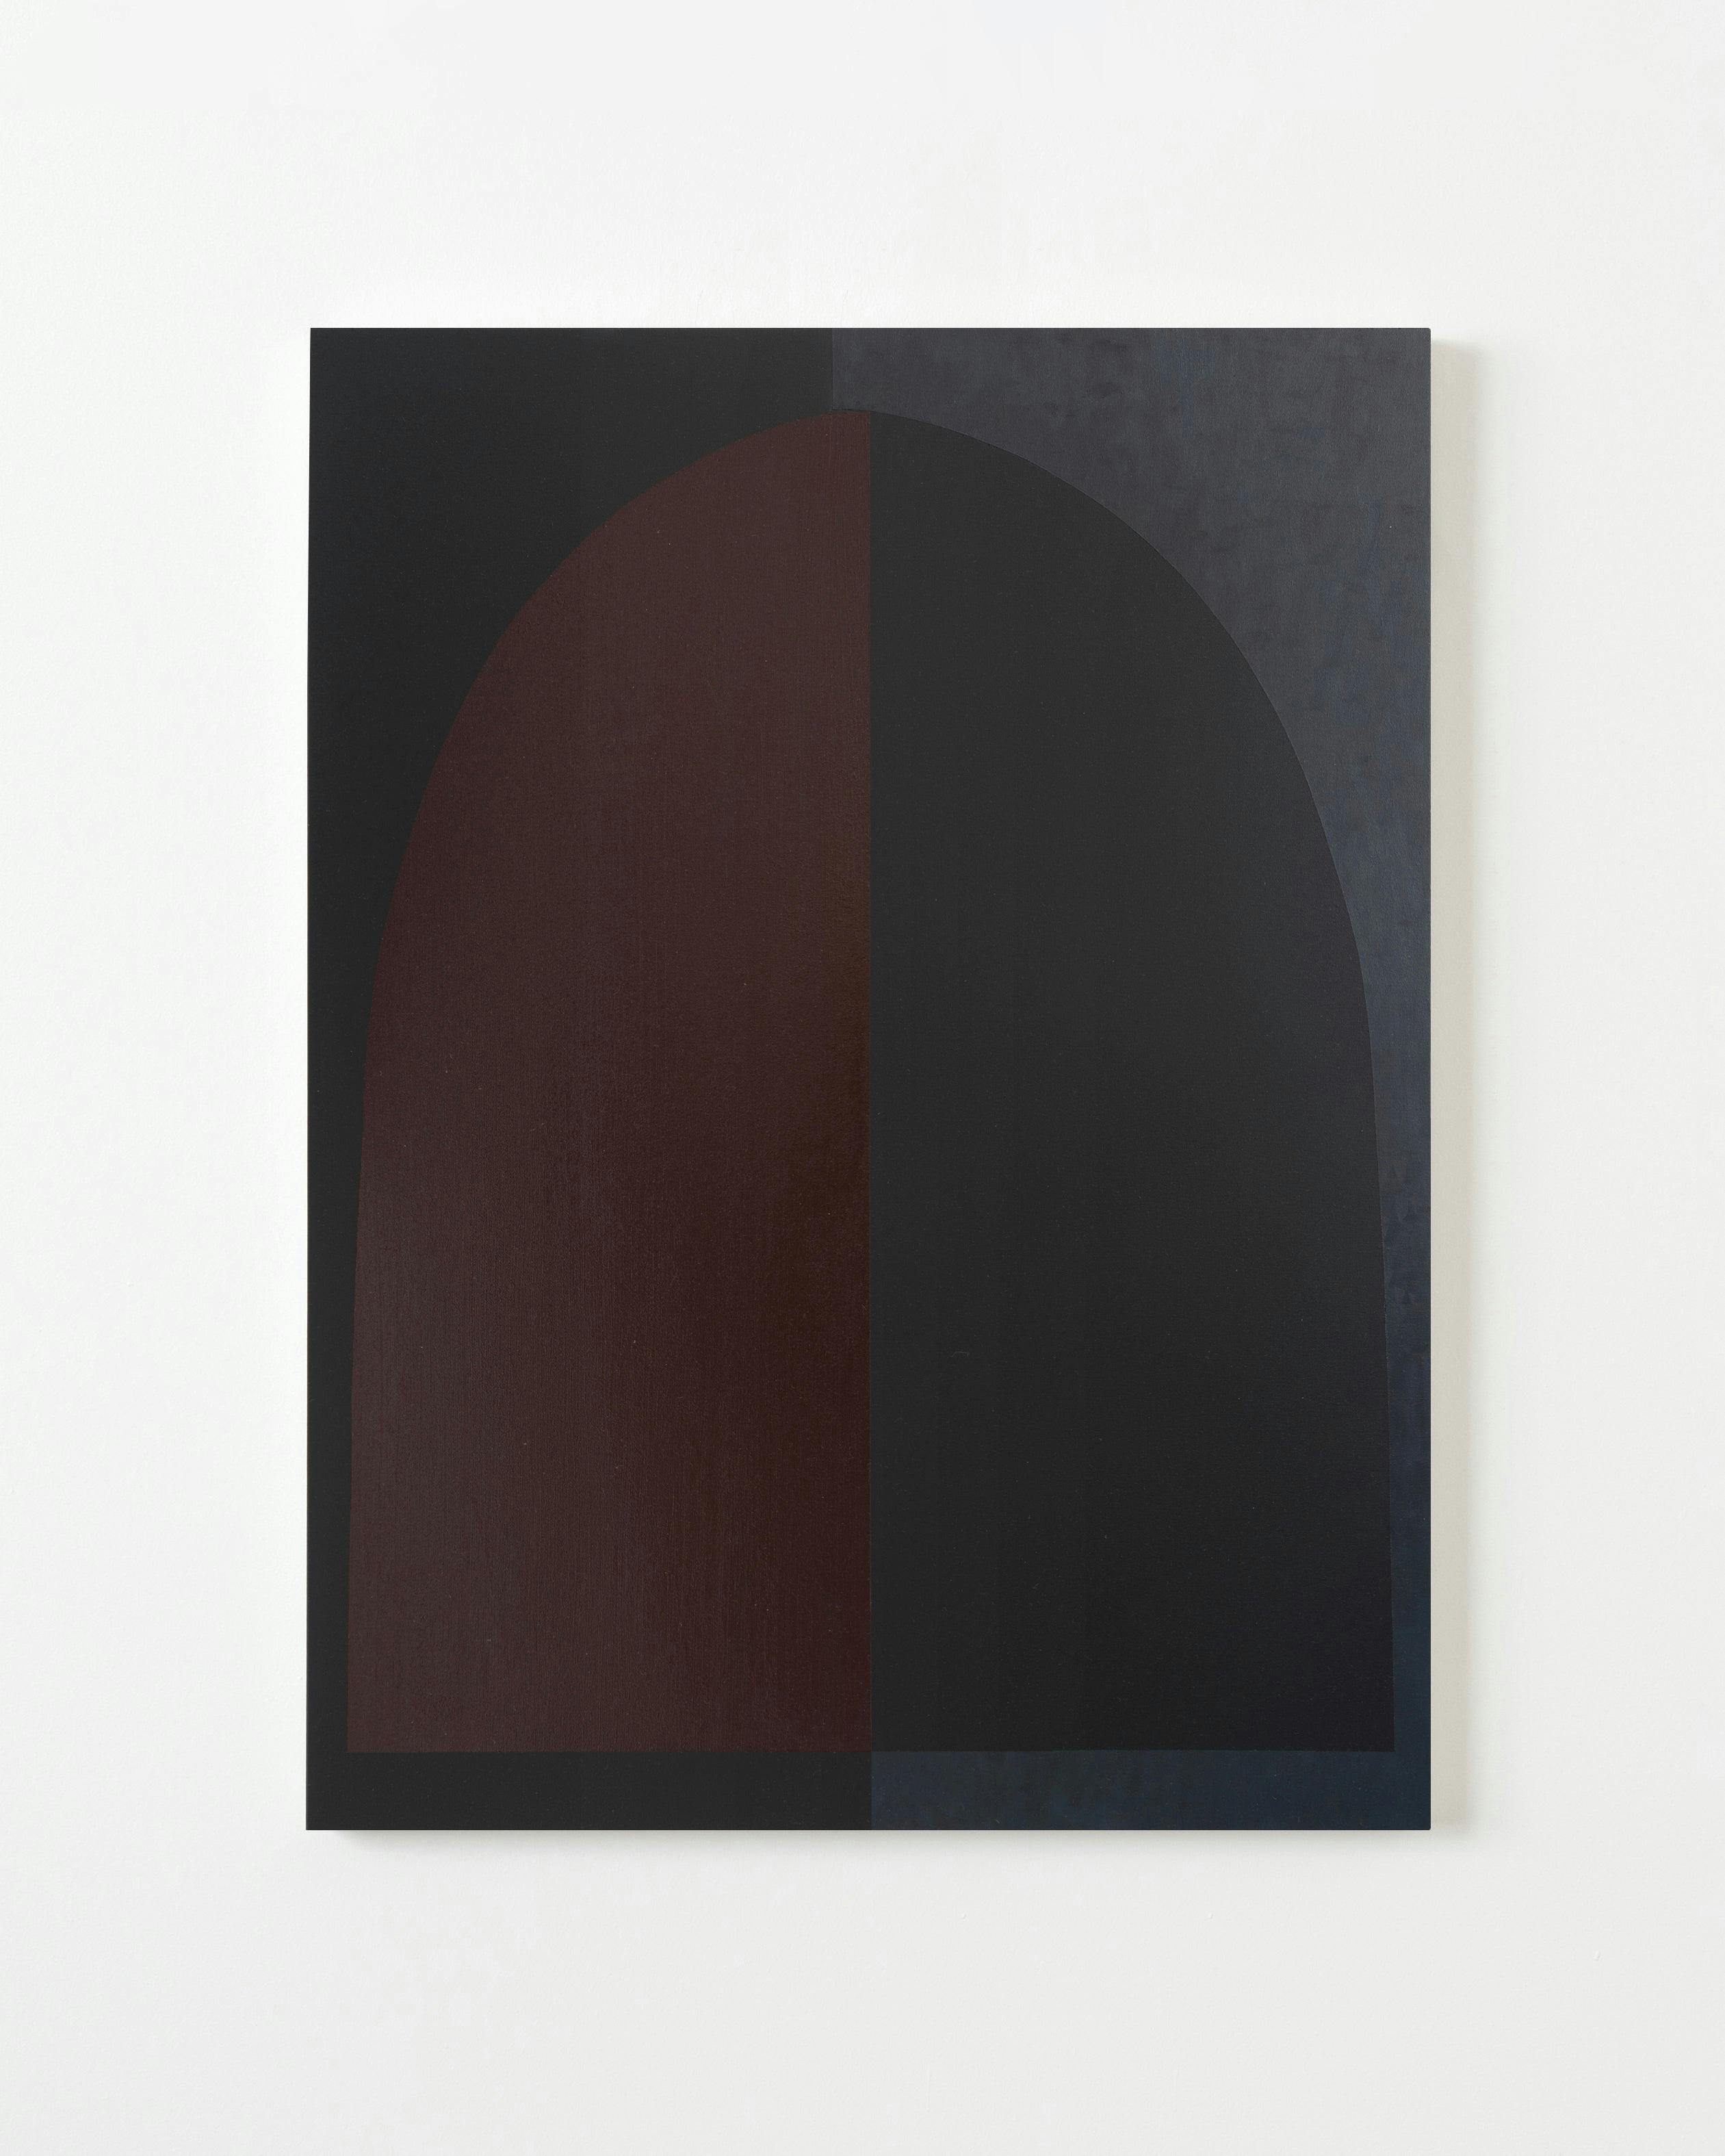 Aschely Vaughan Cone - Grey Arch at Night in Red Light I - Painting